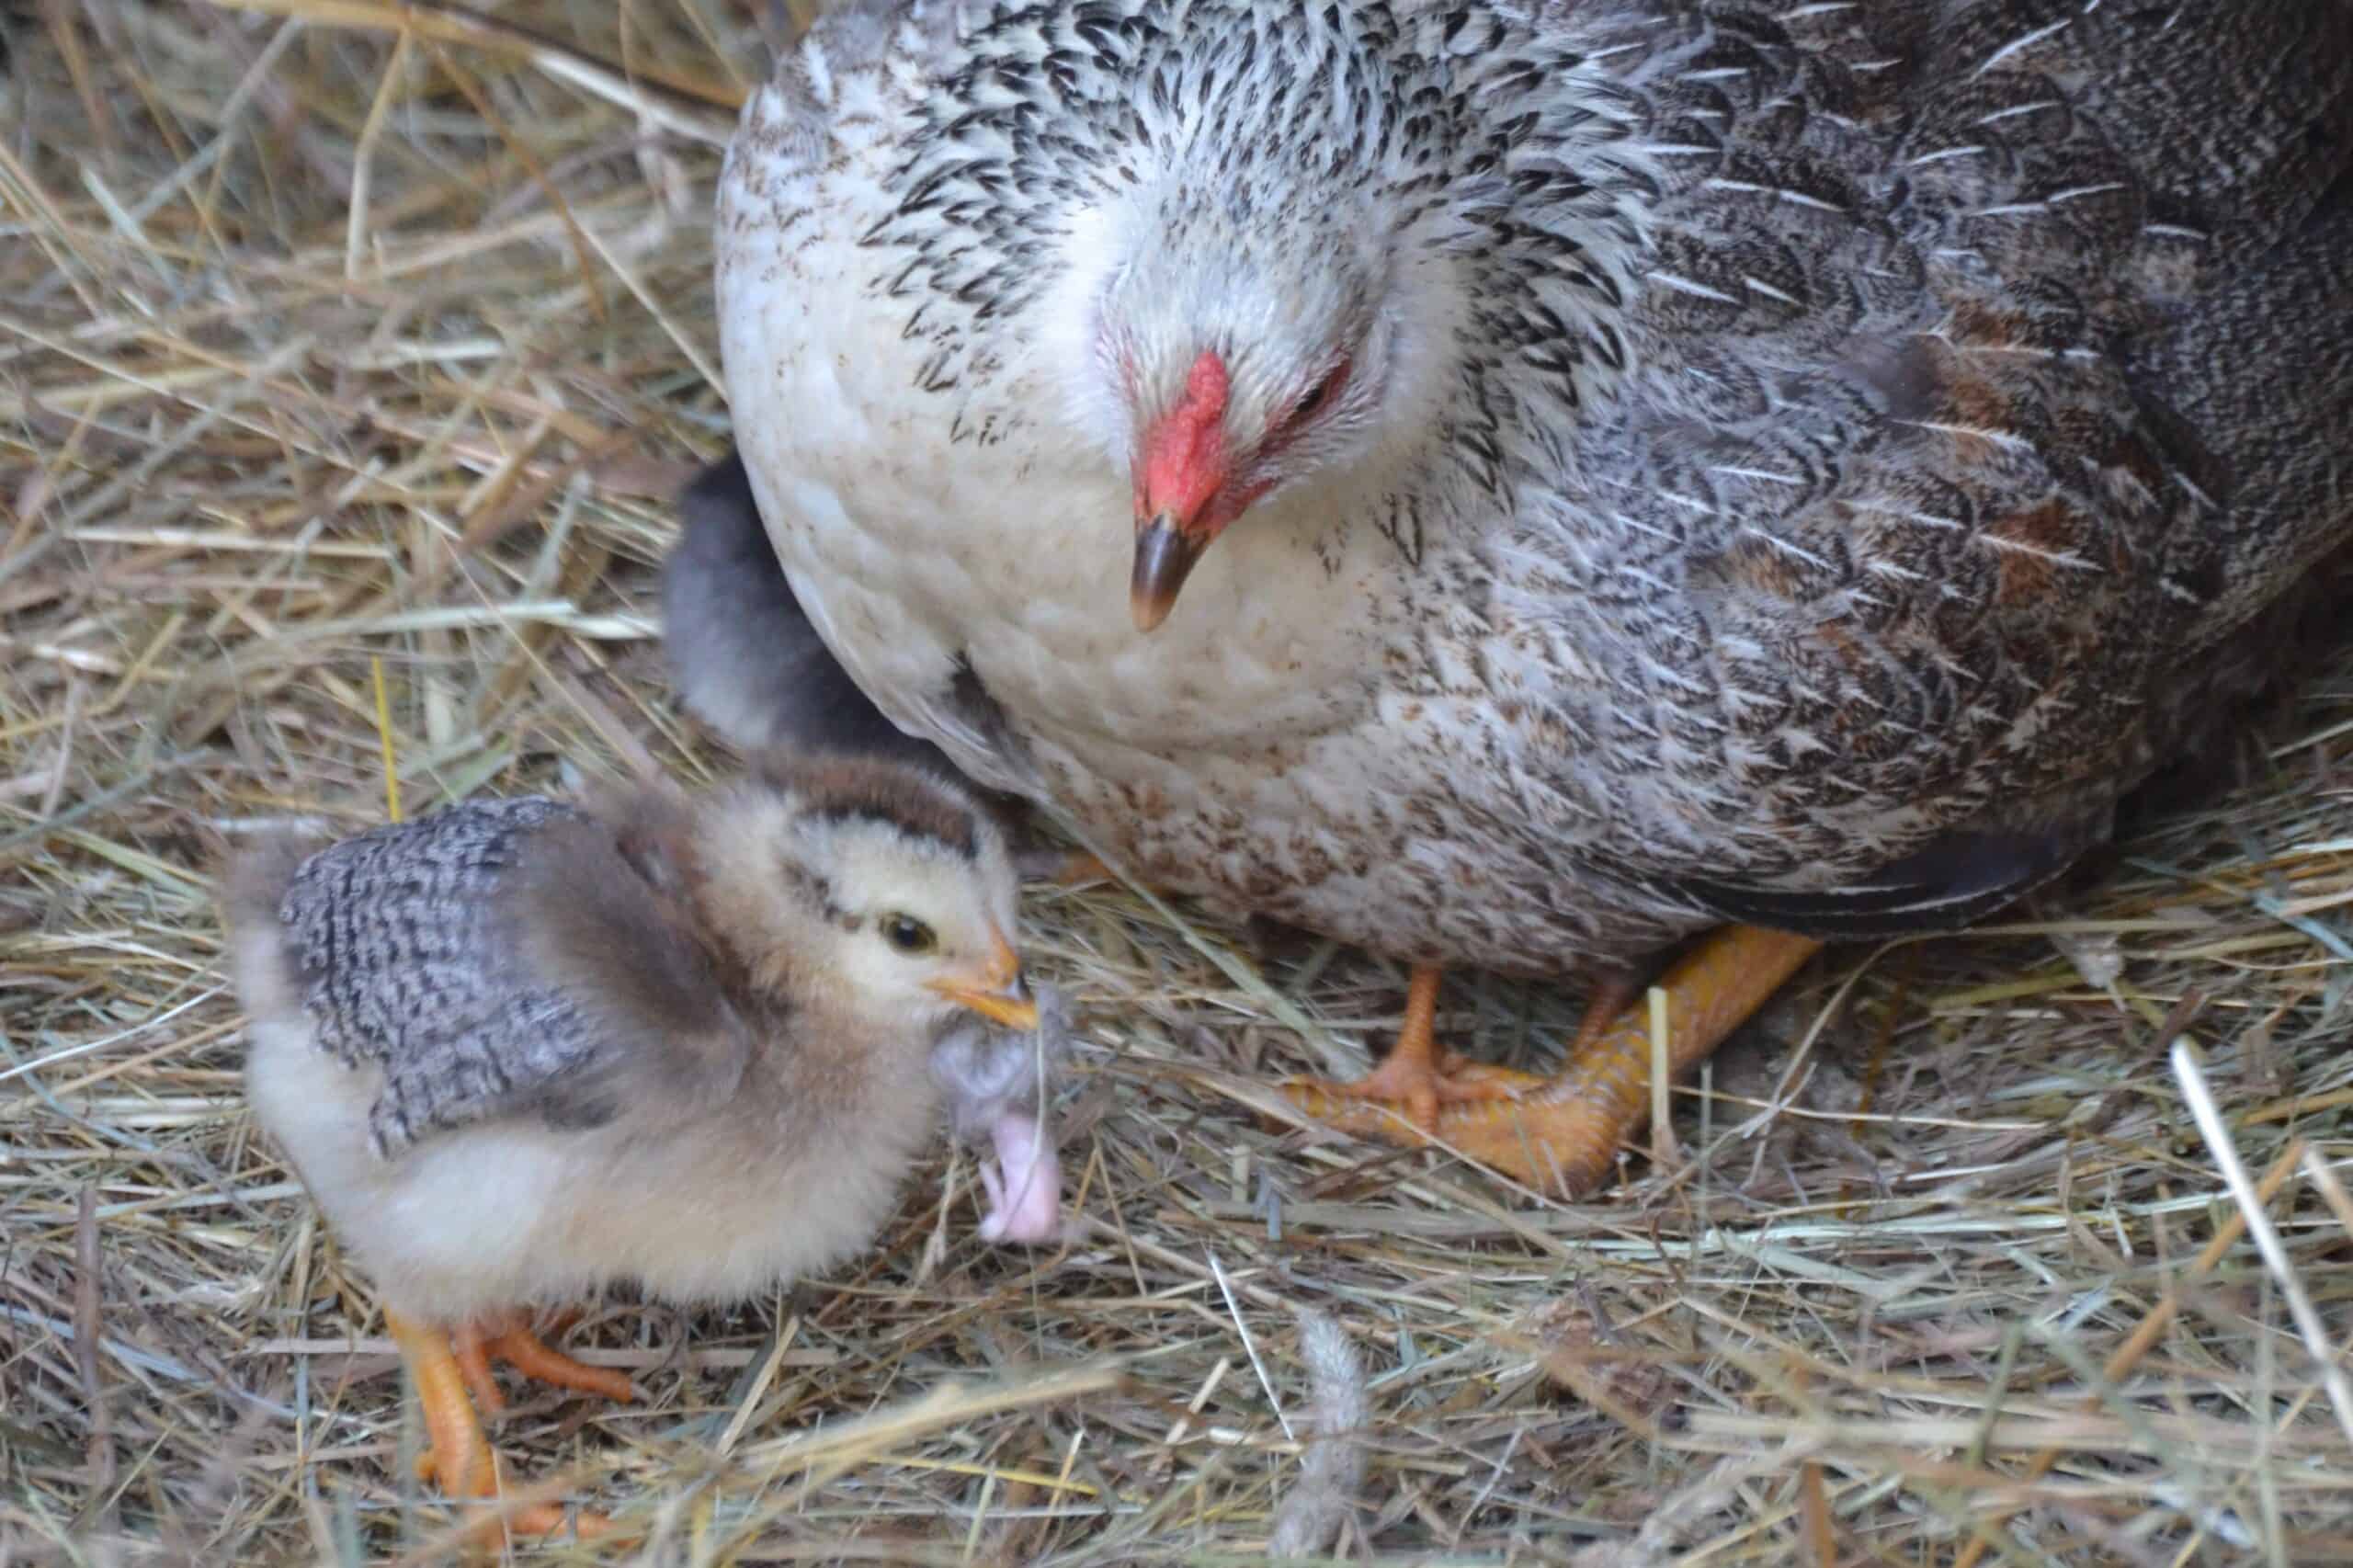 How To Prevent a Broody Hen